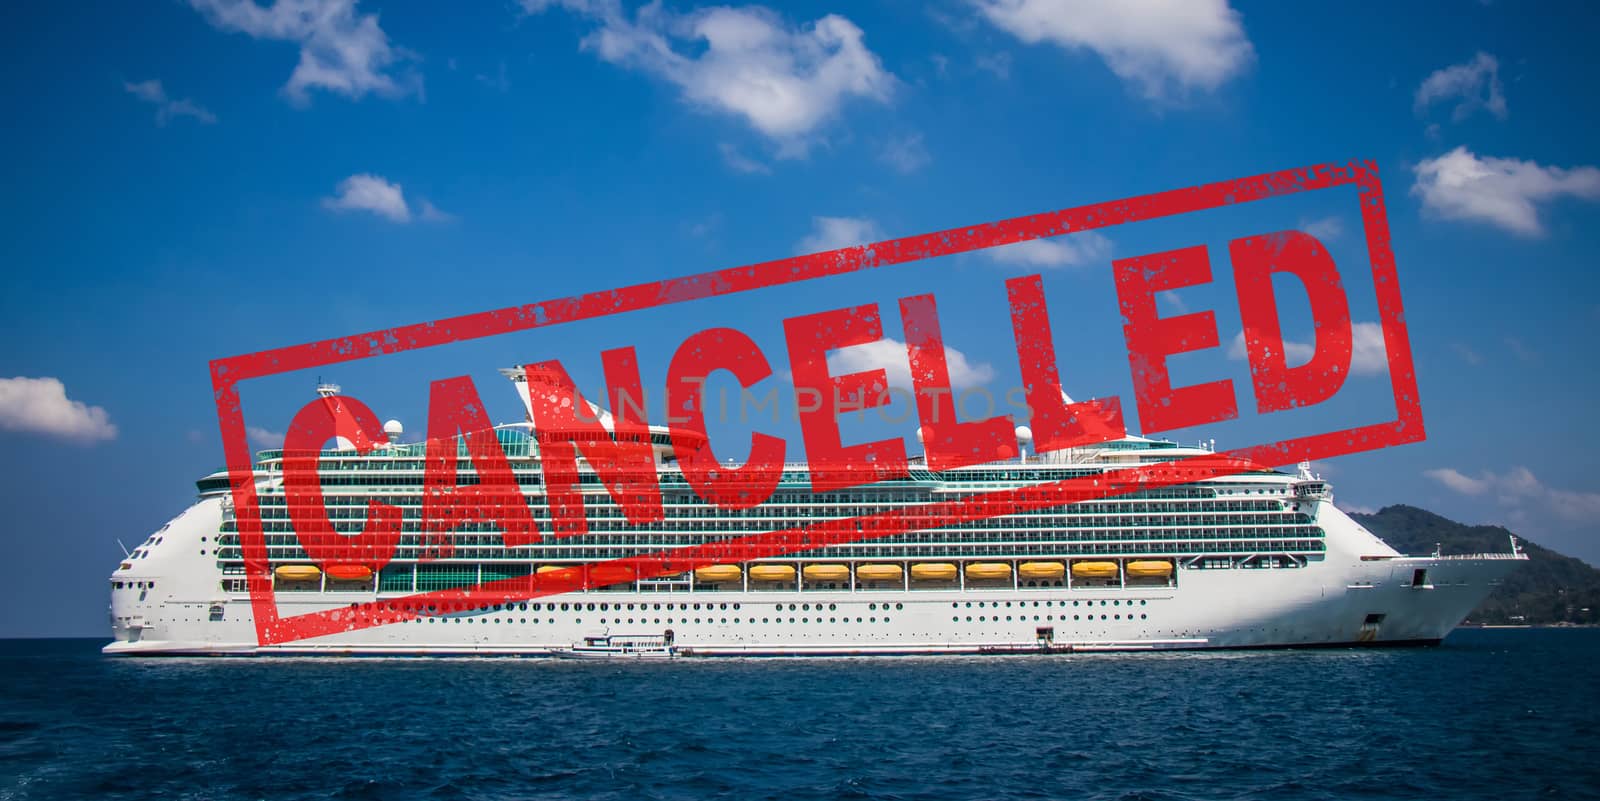 cruise trip cancellation. travel holidays by cruise ship was cancelled because of epidemic of Covid-19 or coronavirus. crisis in the cruise and travel industry around the world.